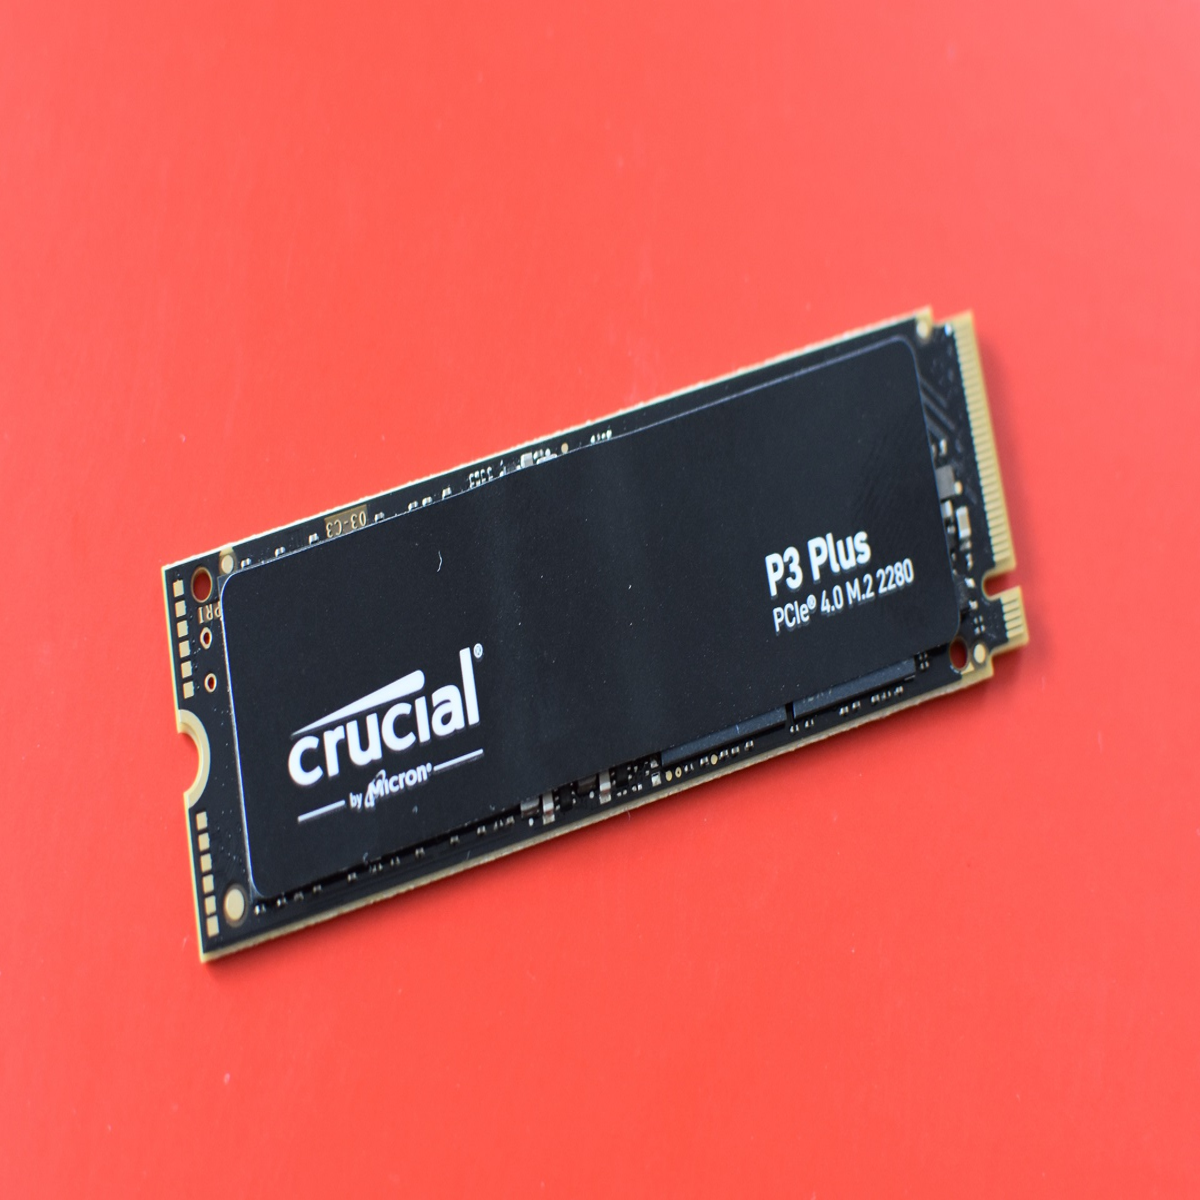 Crucial's tiny X9 Pro and X10 Pro Portable SSDs get big discounts